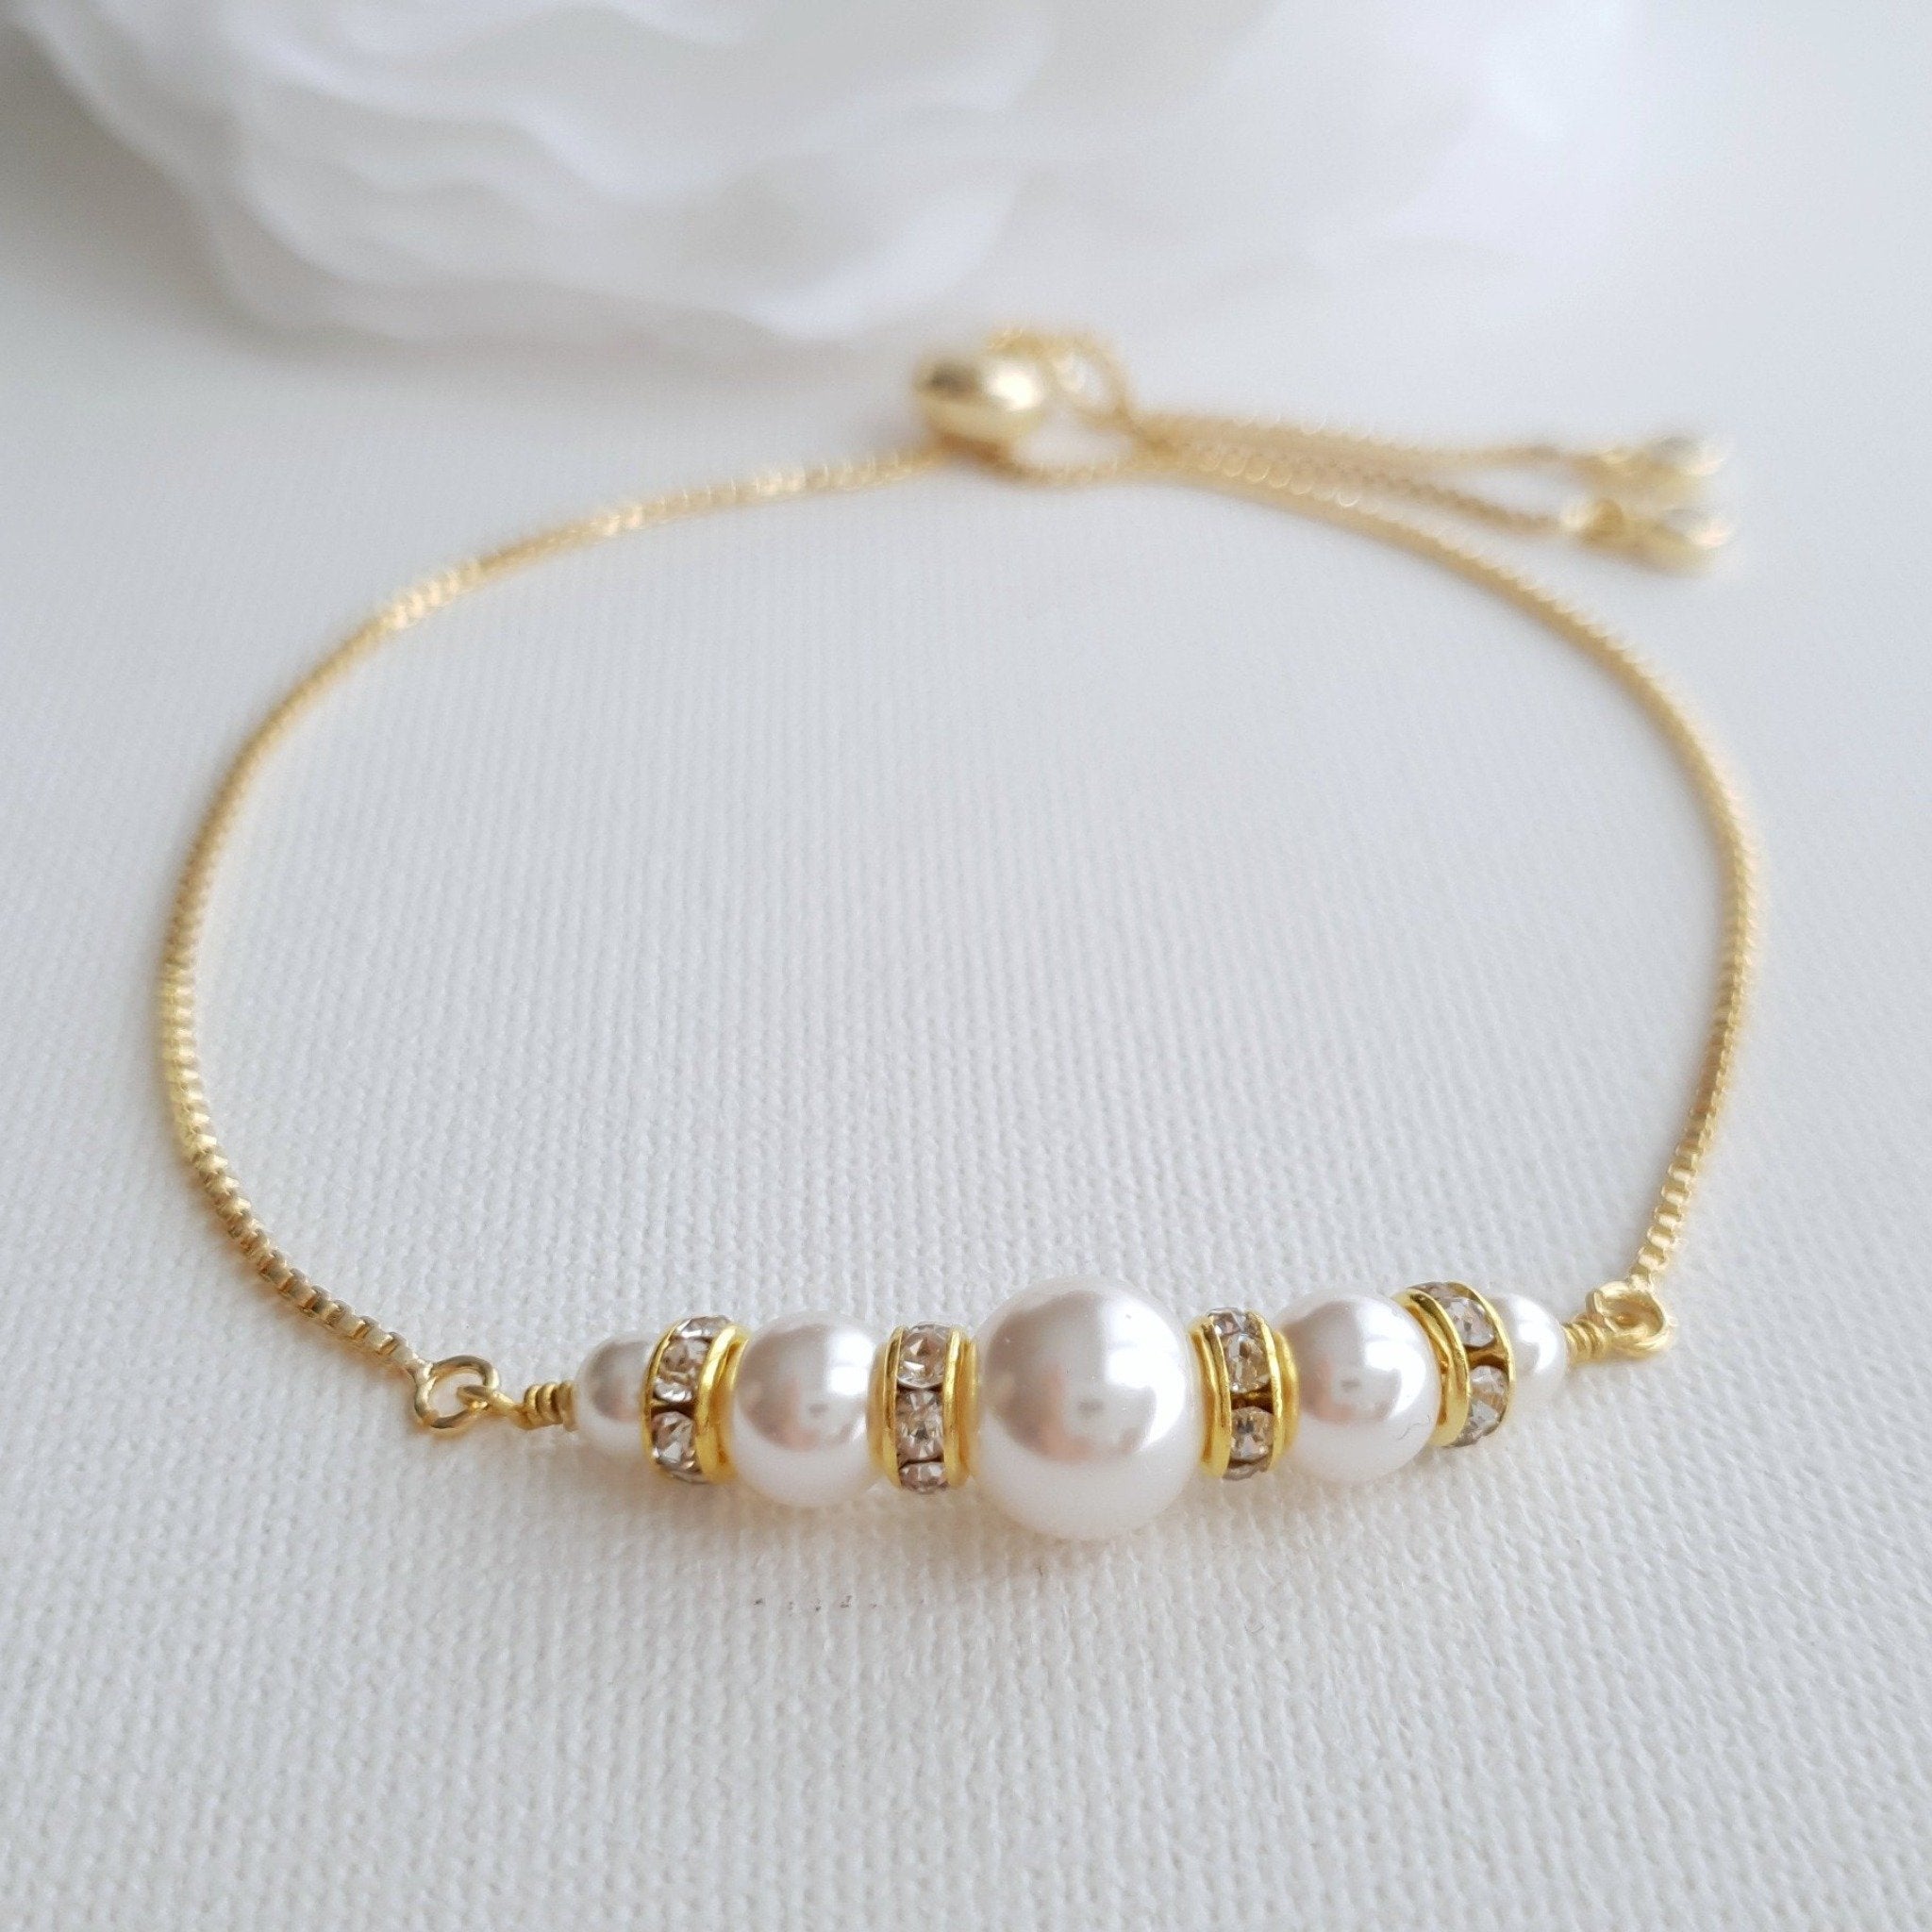 Gold, Silver & Pearl Bracelet - a Timeless Design | Fierce and Free Jewelry